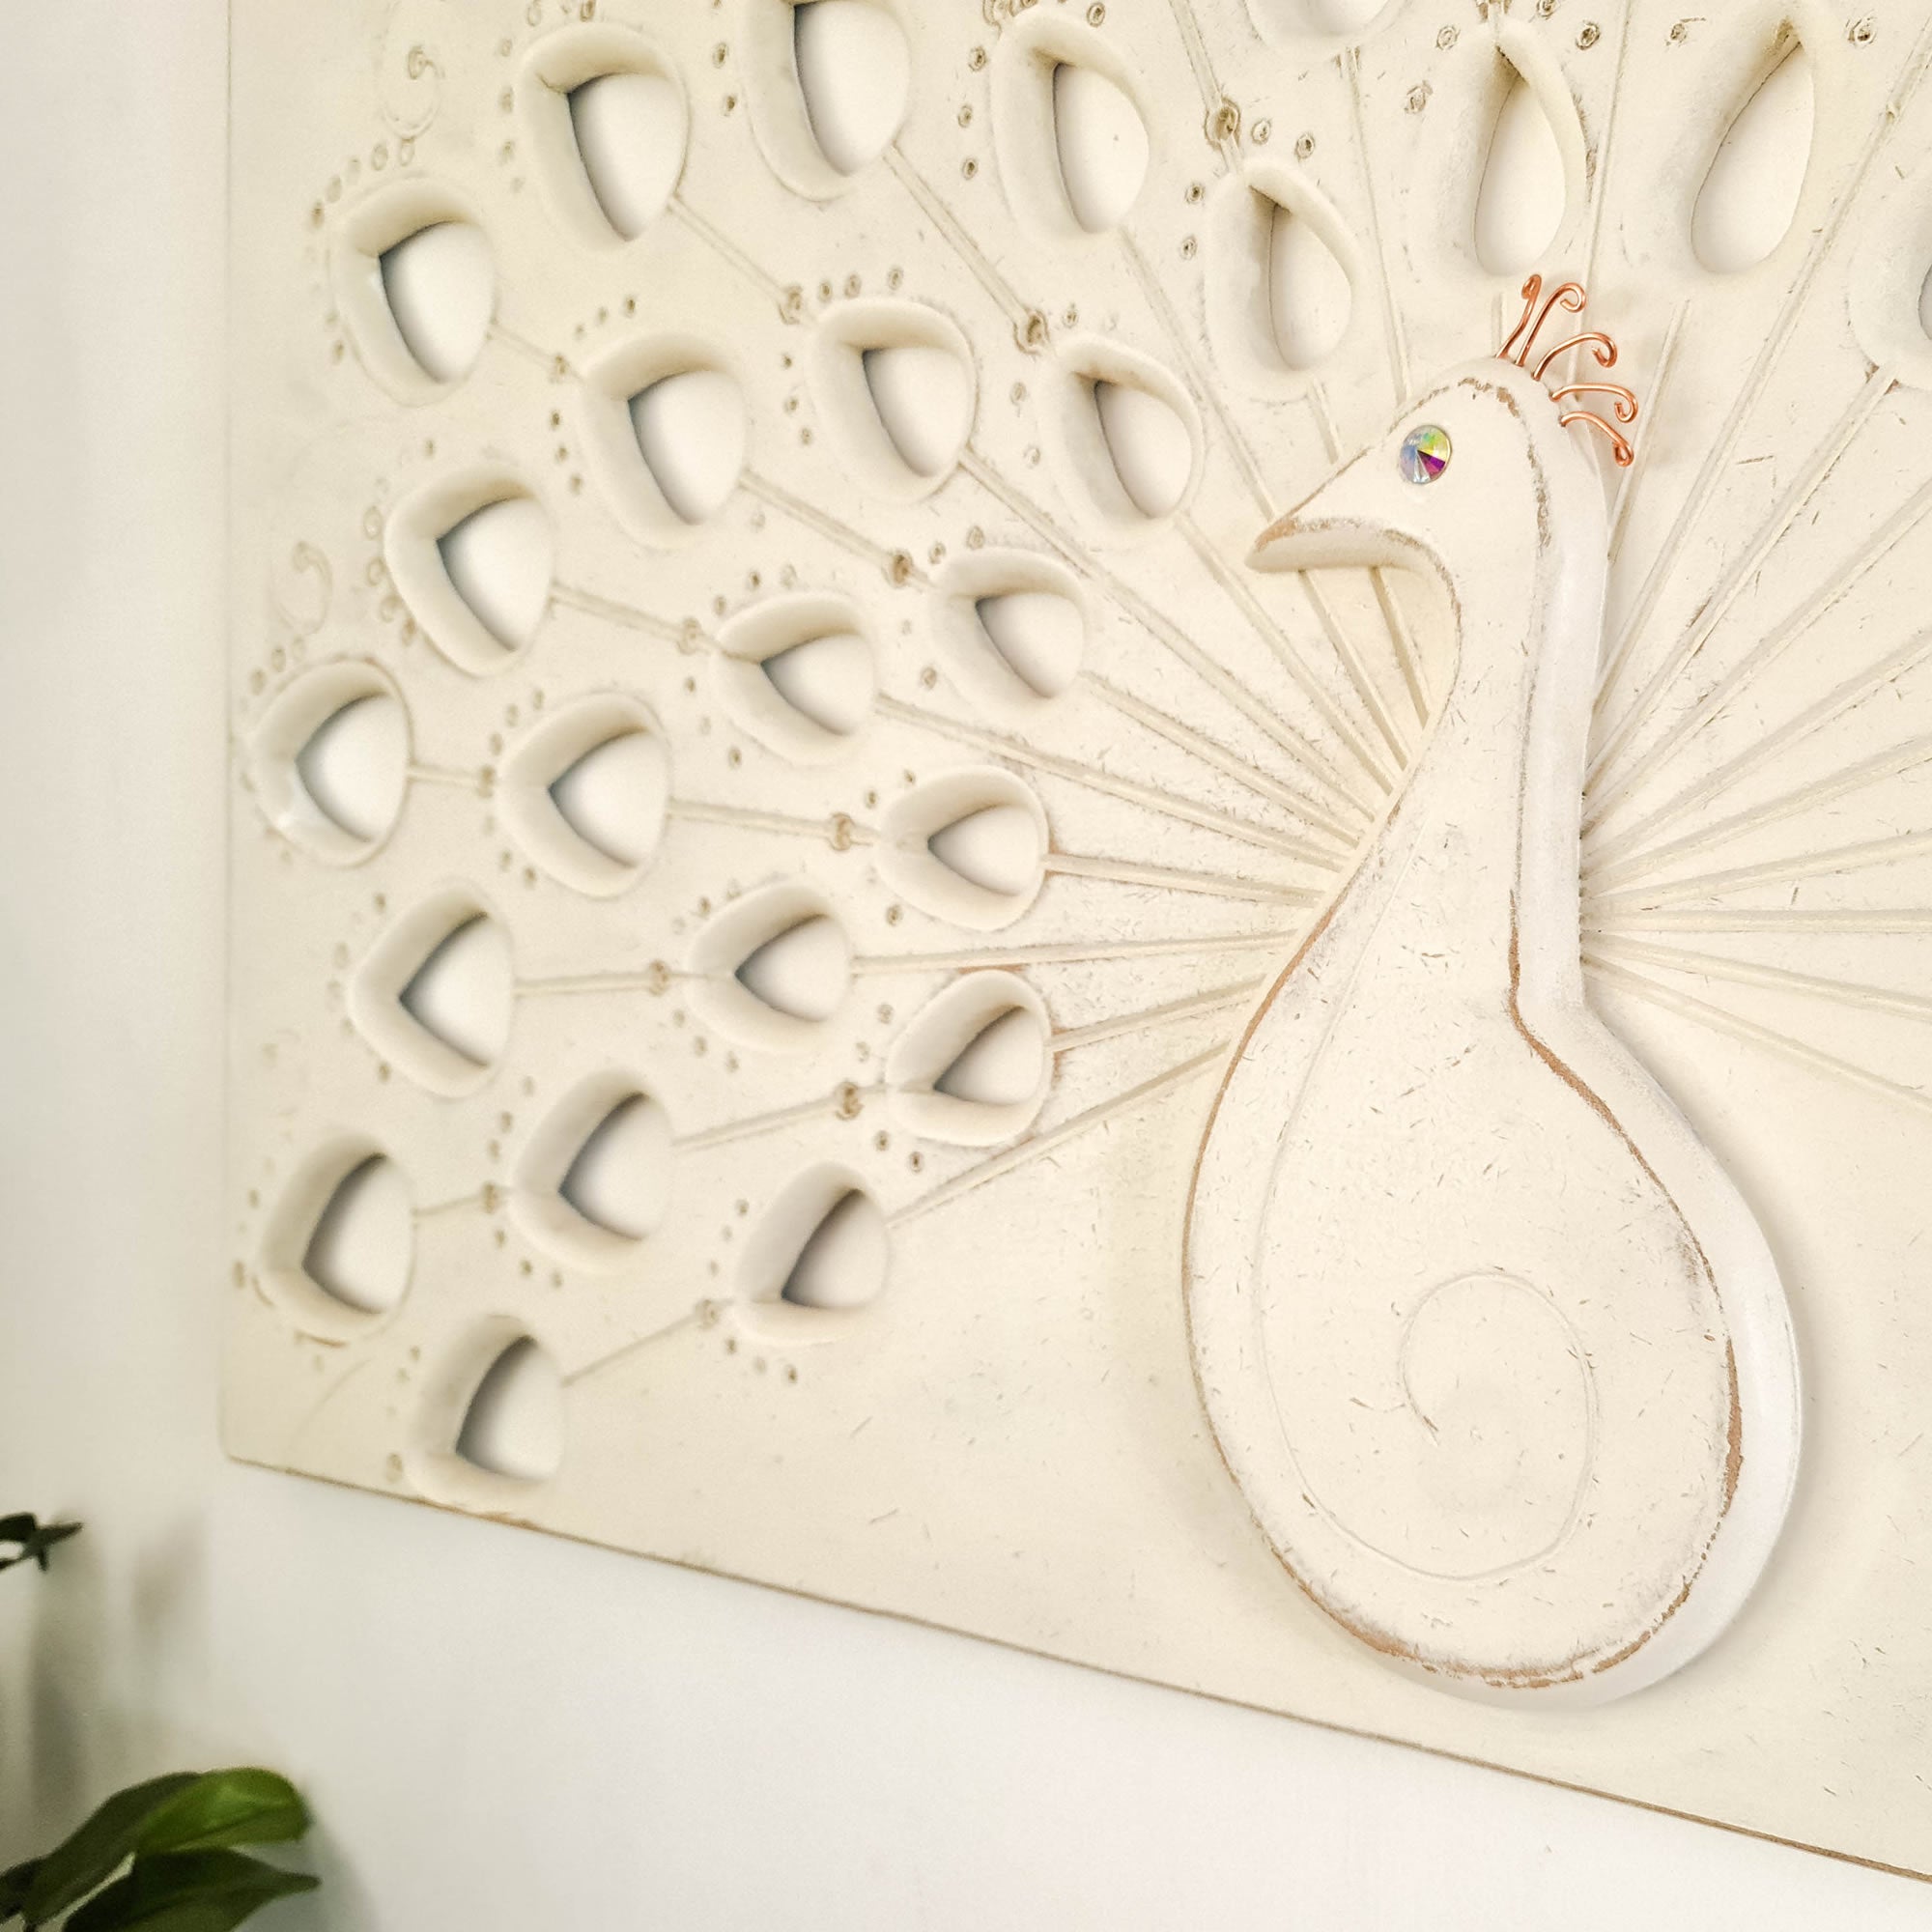 Peacock Hand Carved Wooden Decorative Sculpture Wall Art Distressed White Headboard Shabby Chic